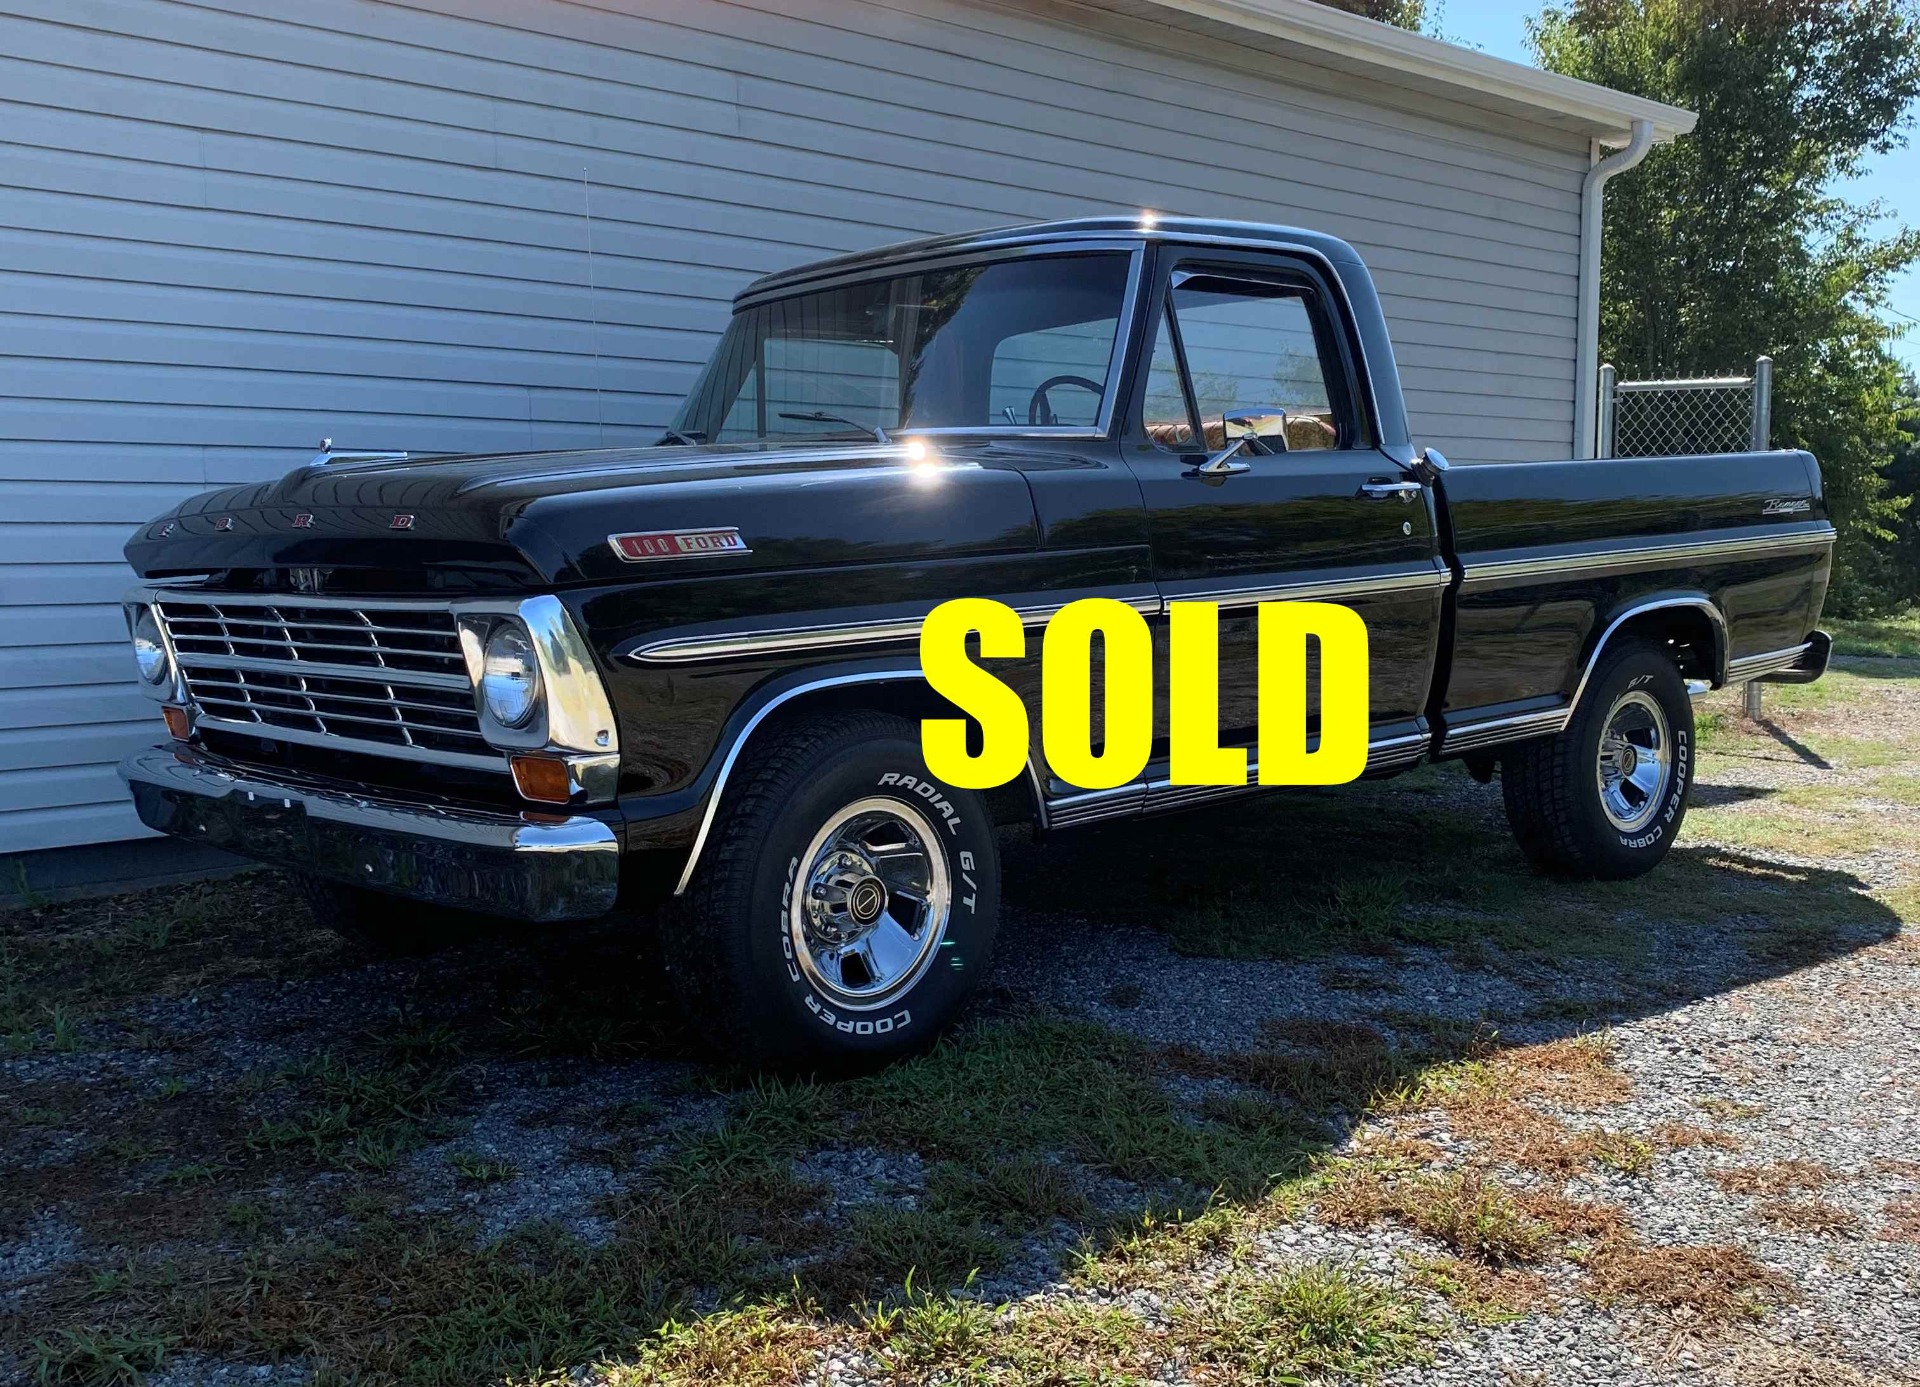 Used 1967 Ford F-100  173 , For Sale $34500, Call Us: (704) 996-3735